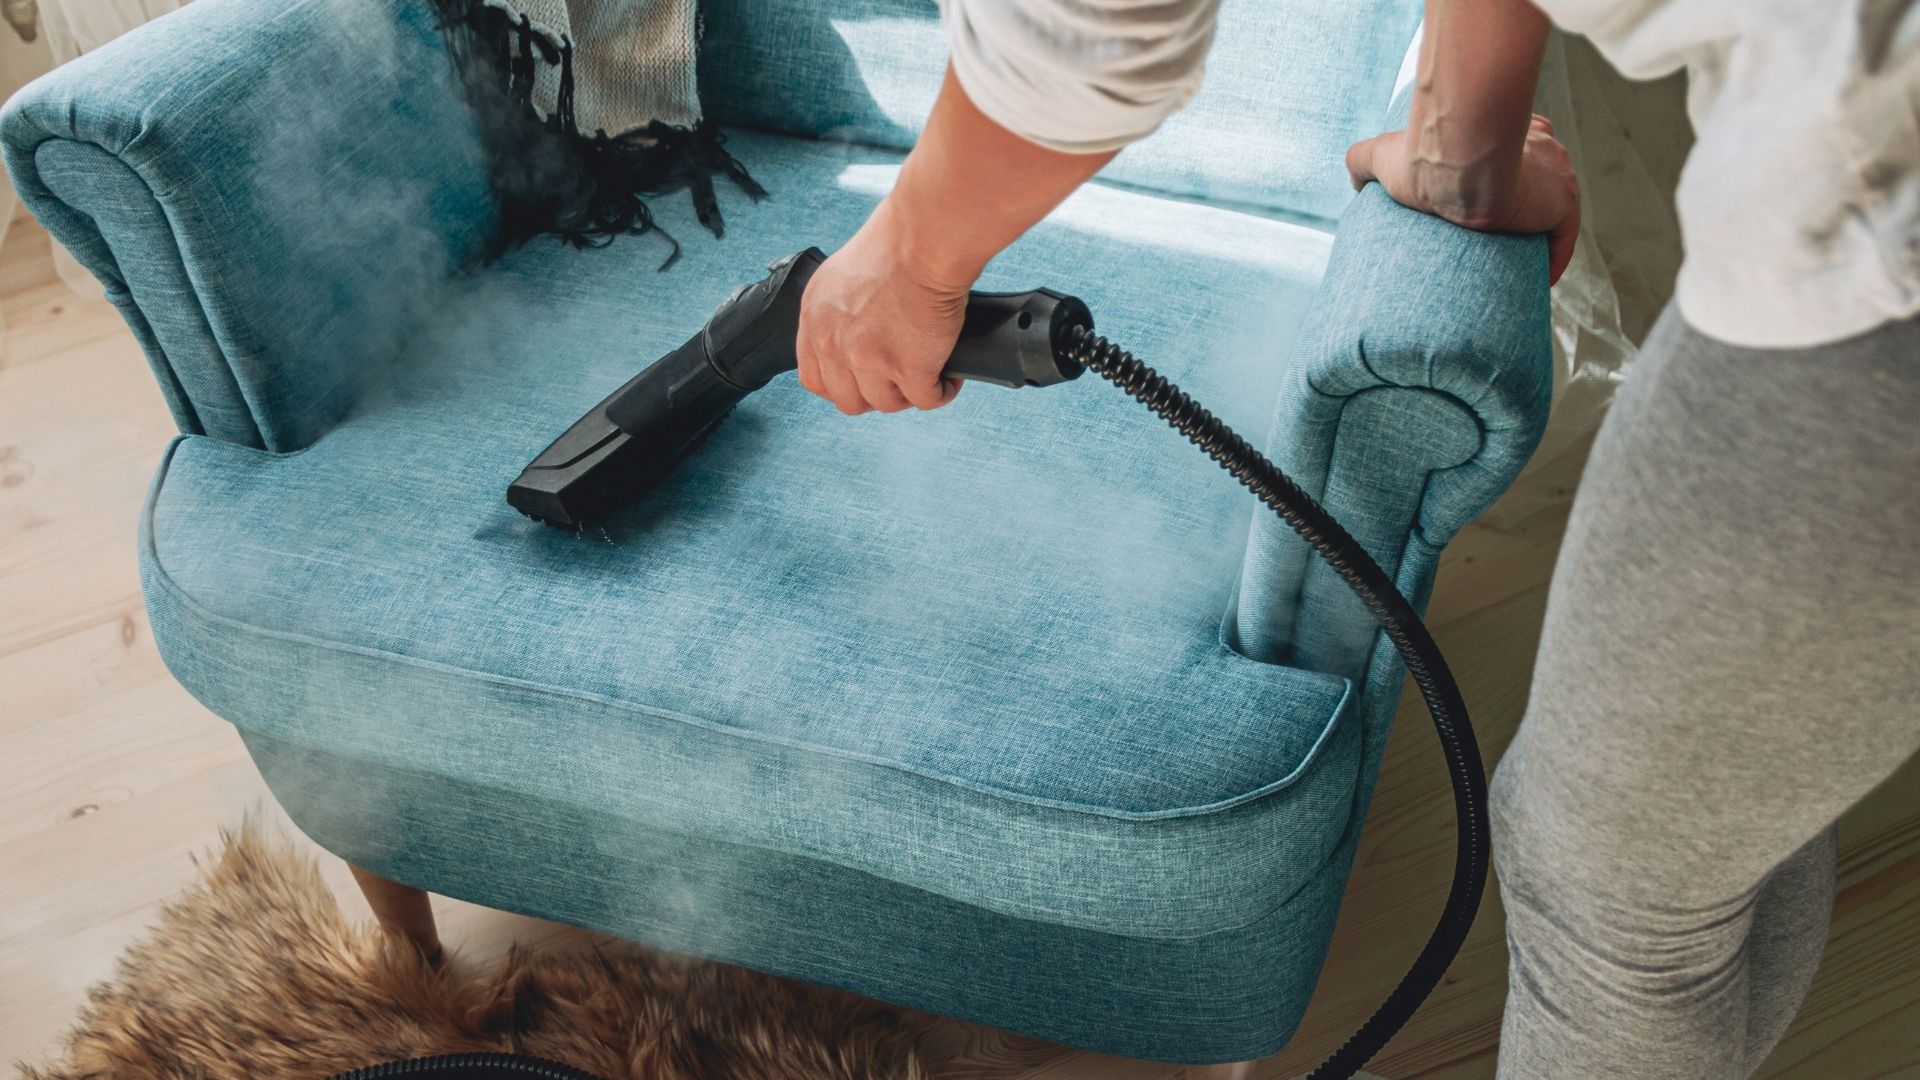 10 Best Upholstery Cleaners in 2022 - Upholstery & Fabric Cleaners